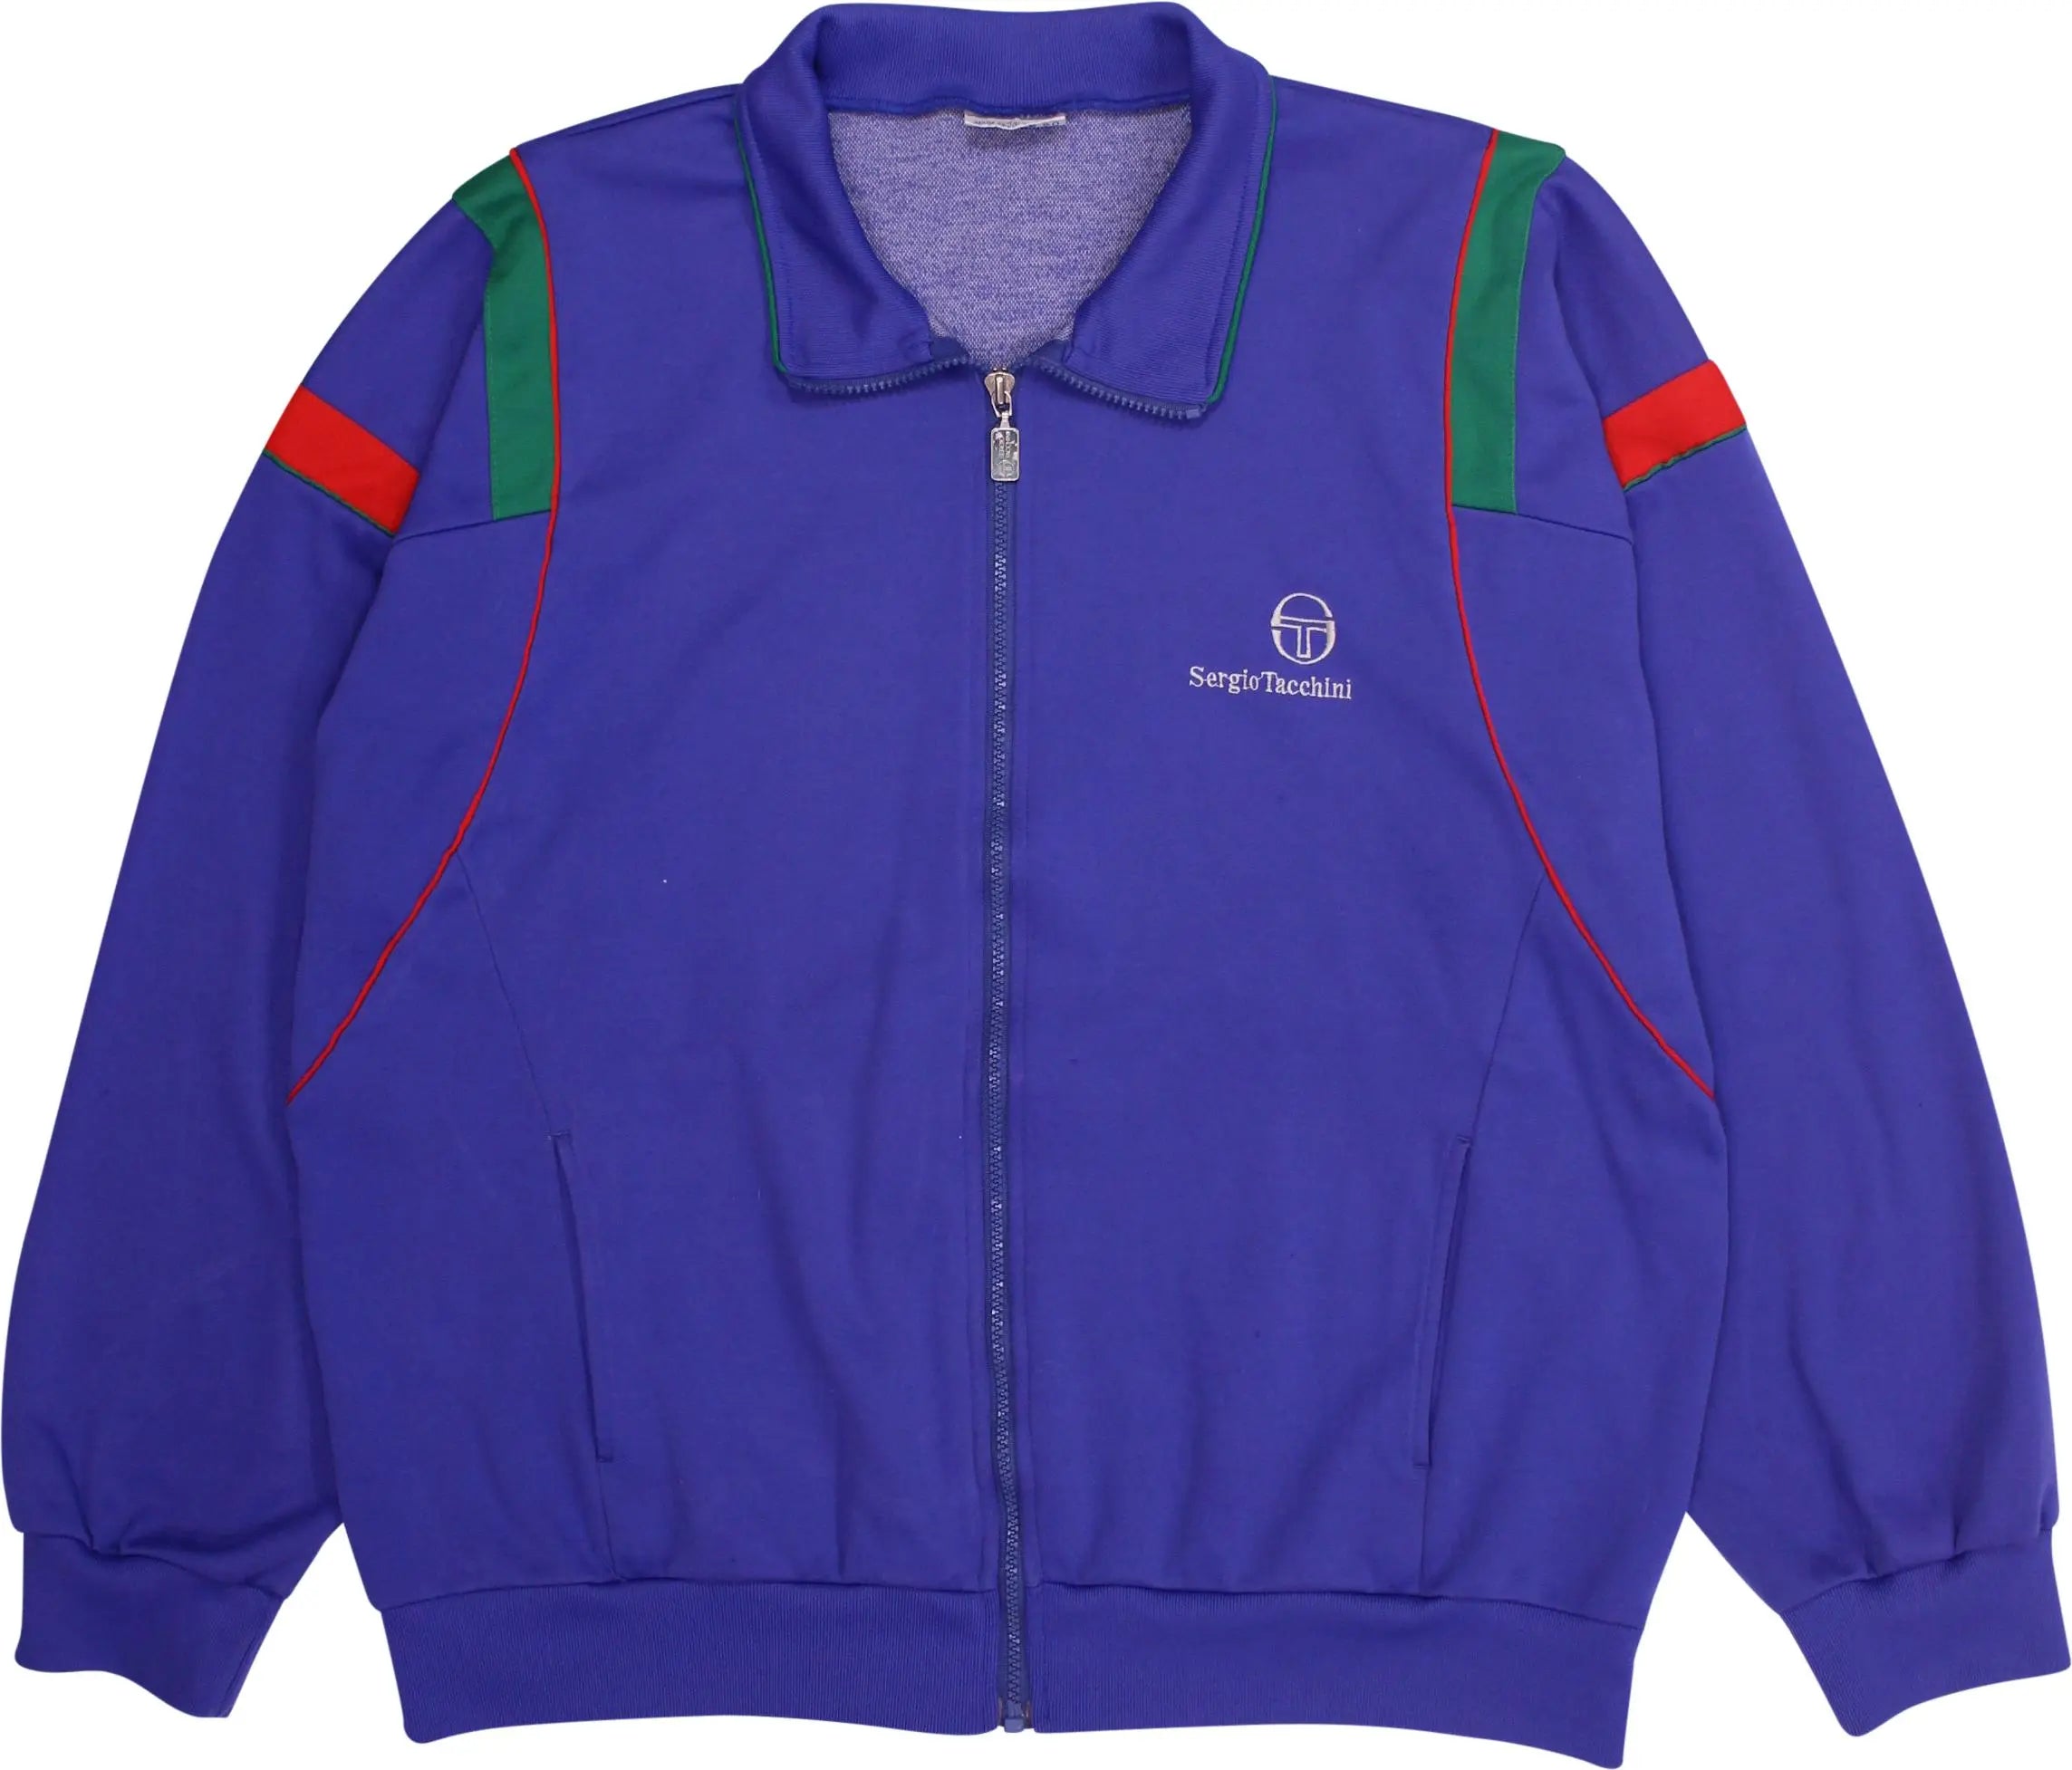 Sergio Tacchini - Track Jacket by Sergio Tacchini- ThriftTale.com - Vintage and second handclothing